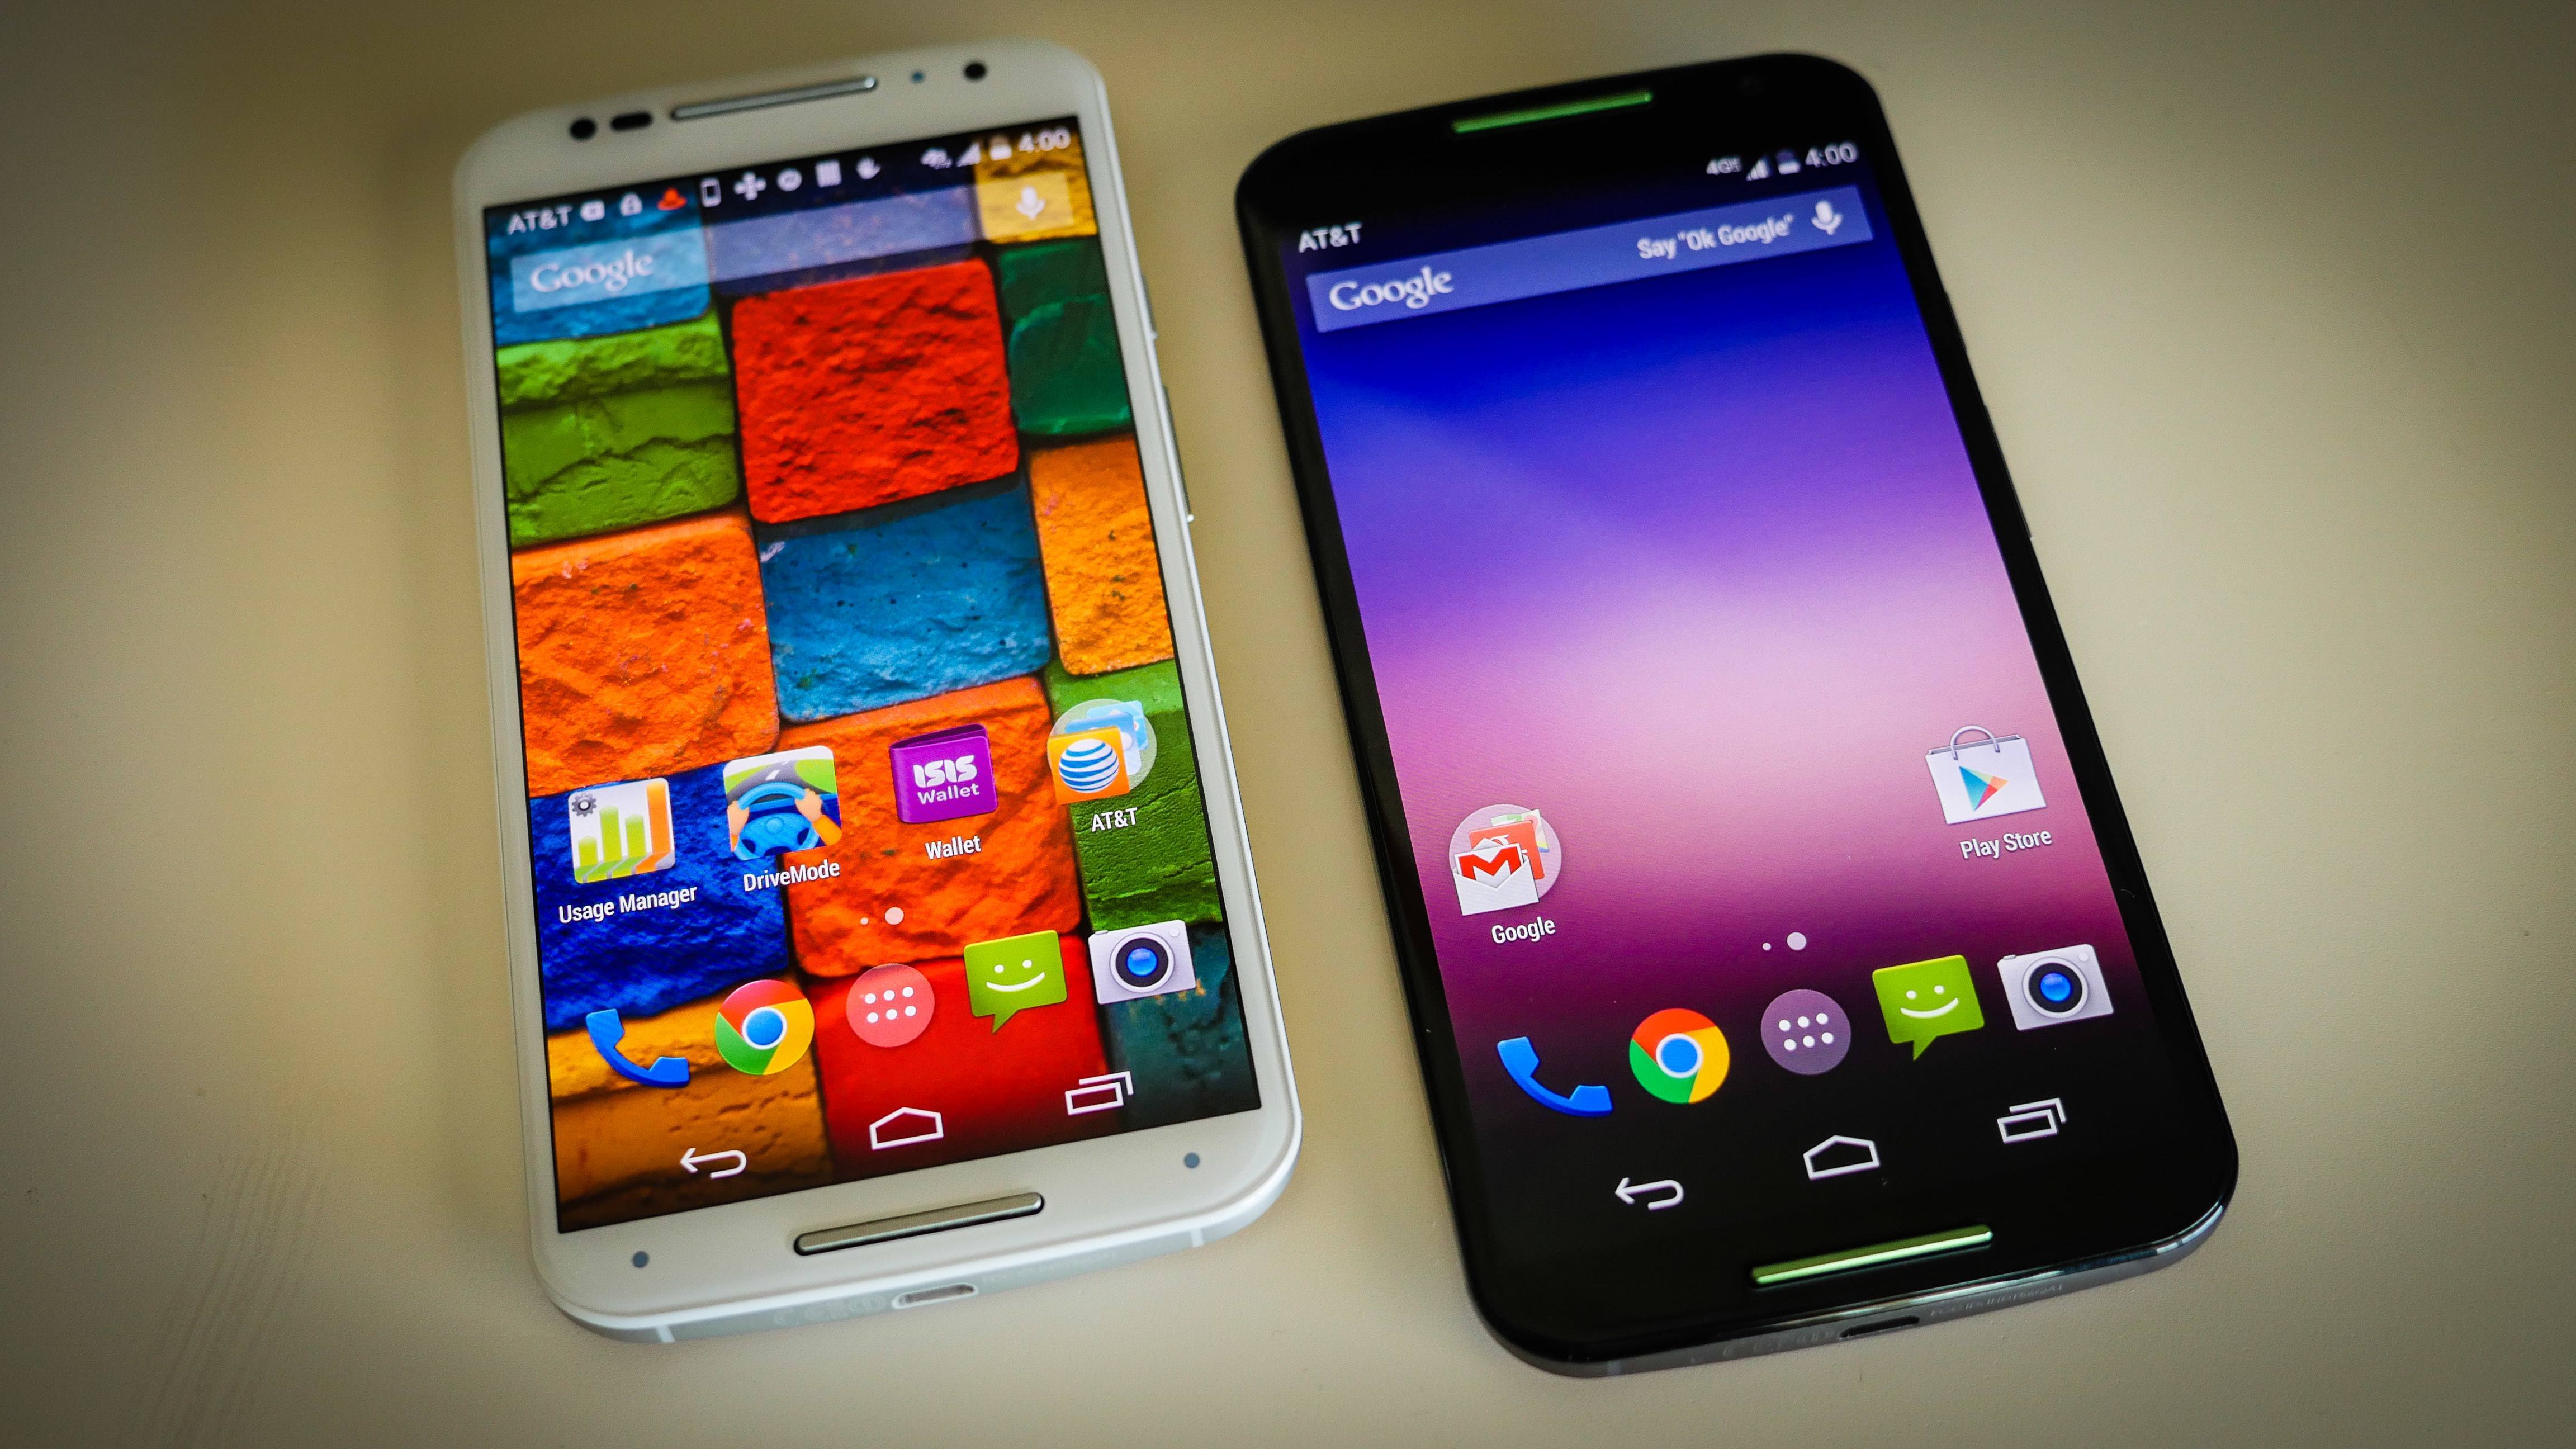 Moto G 2 specifications